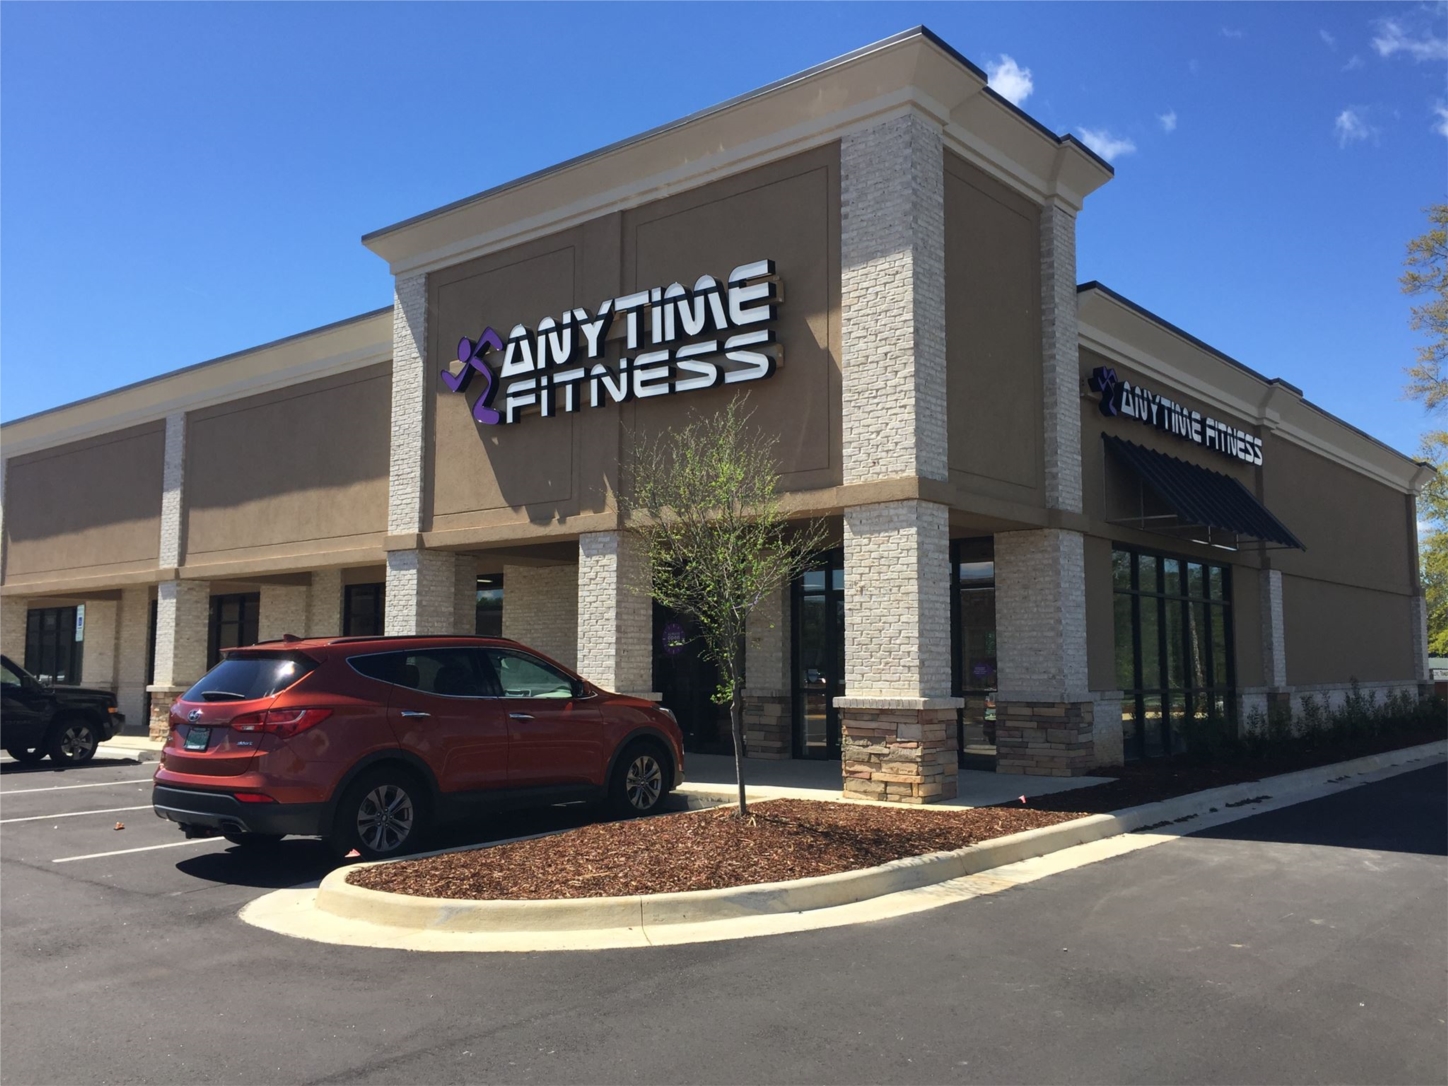 This new Anytime Fitness in Opelika, AL is one of more than 3,500 worldwide.